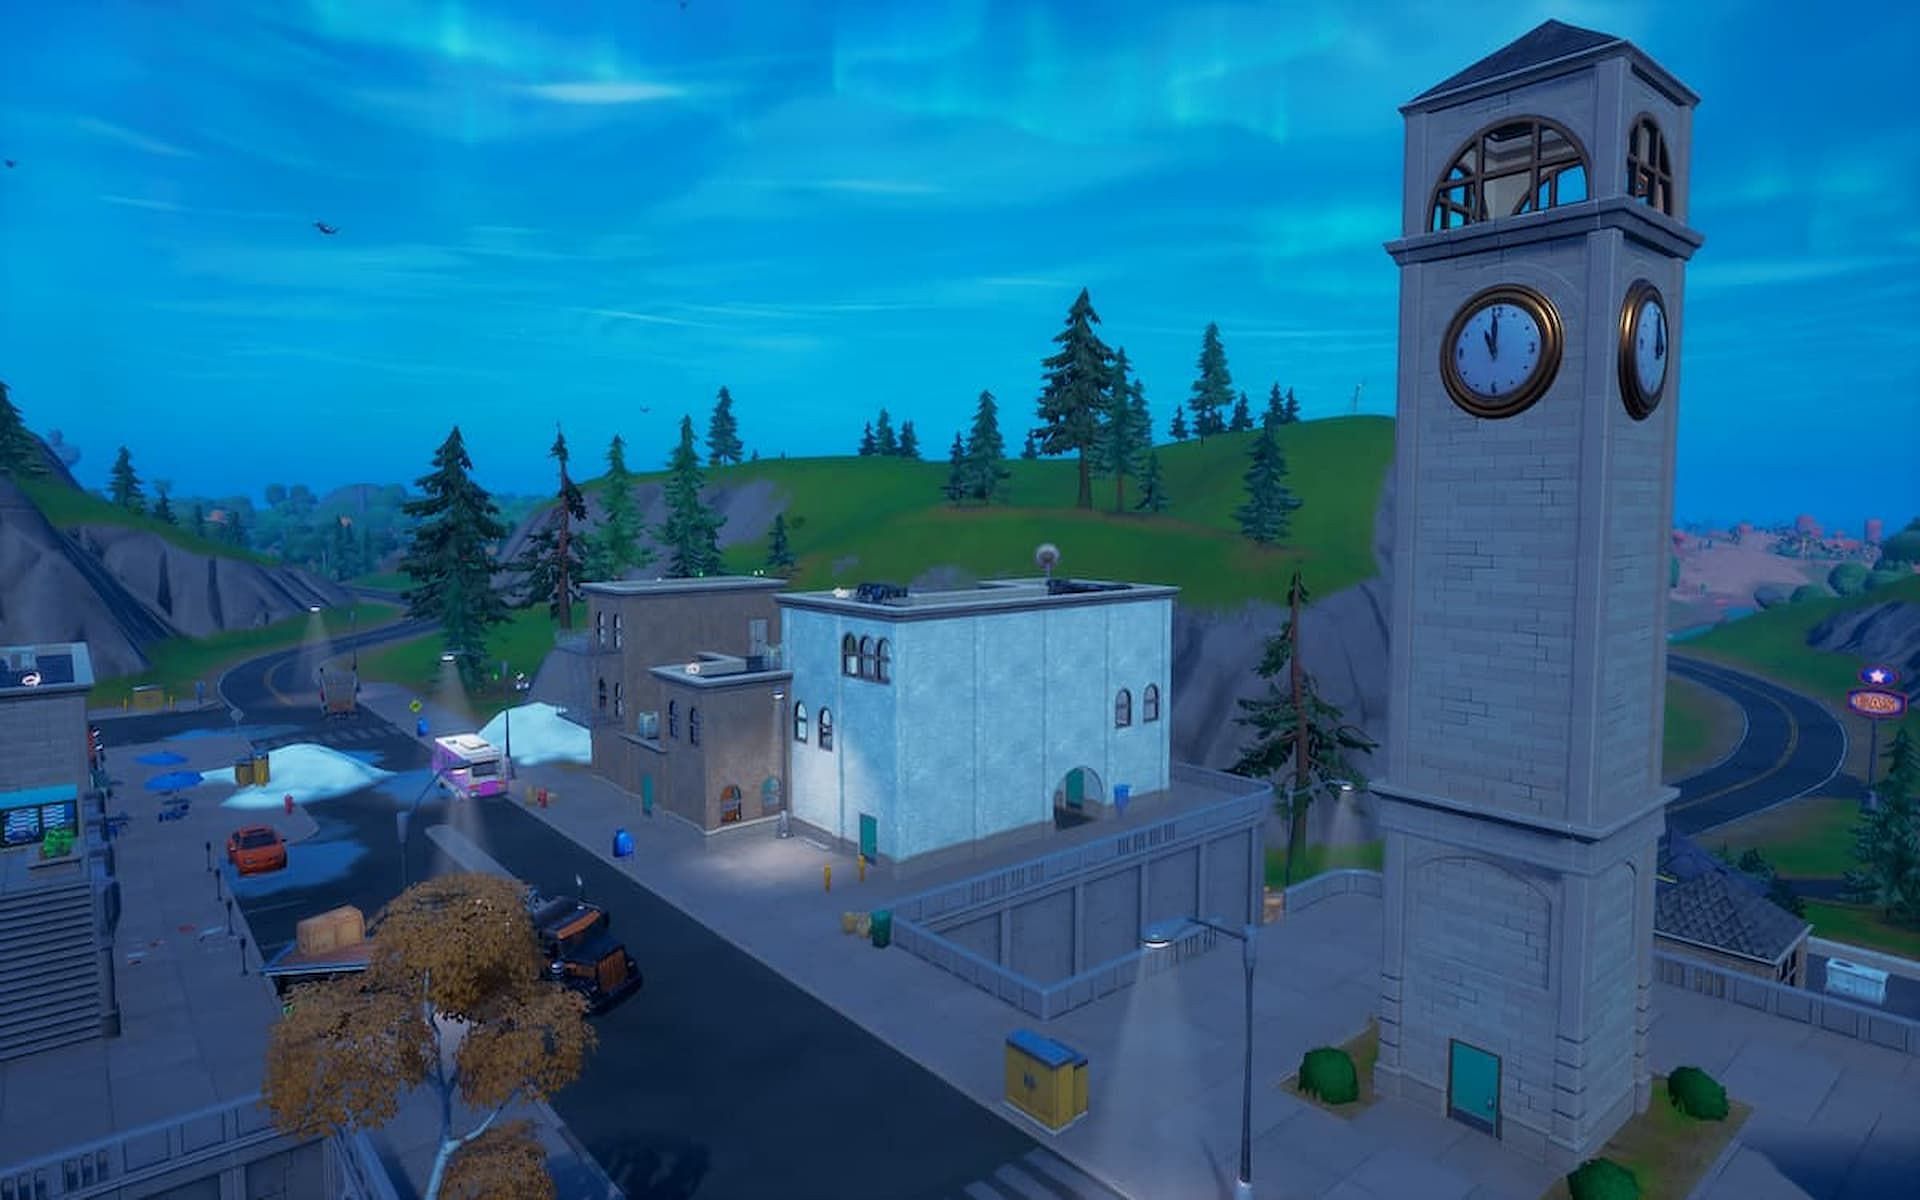 Tilted Towers has returned in Fortnite Chapter 3 Season 1 (Image via Epic Games)